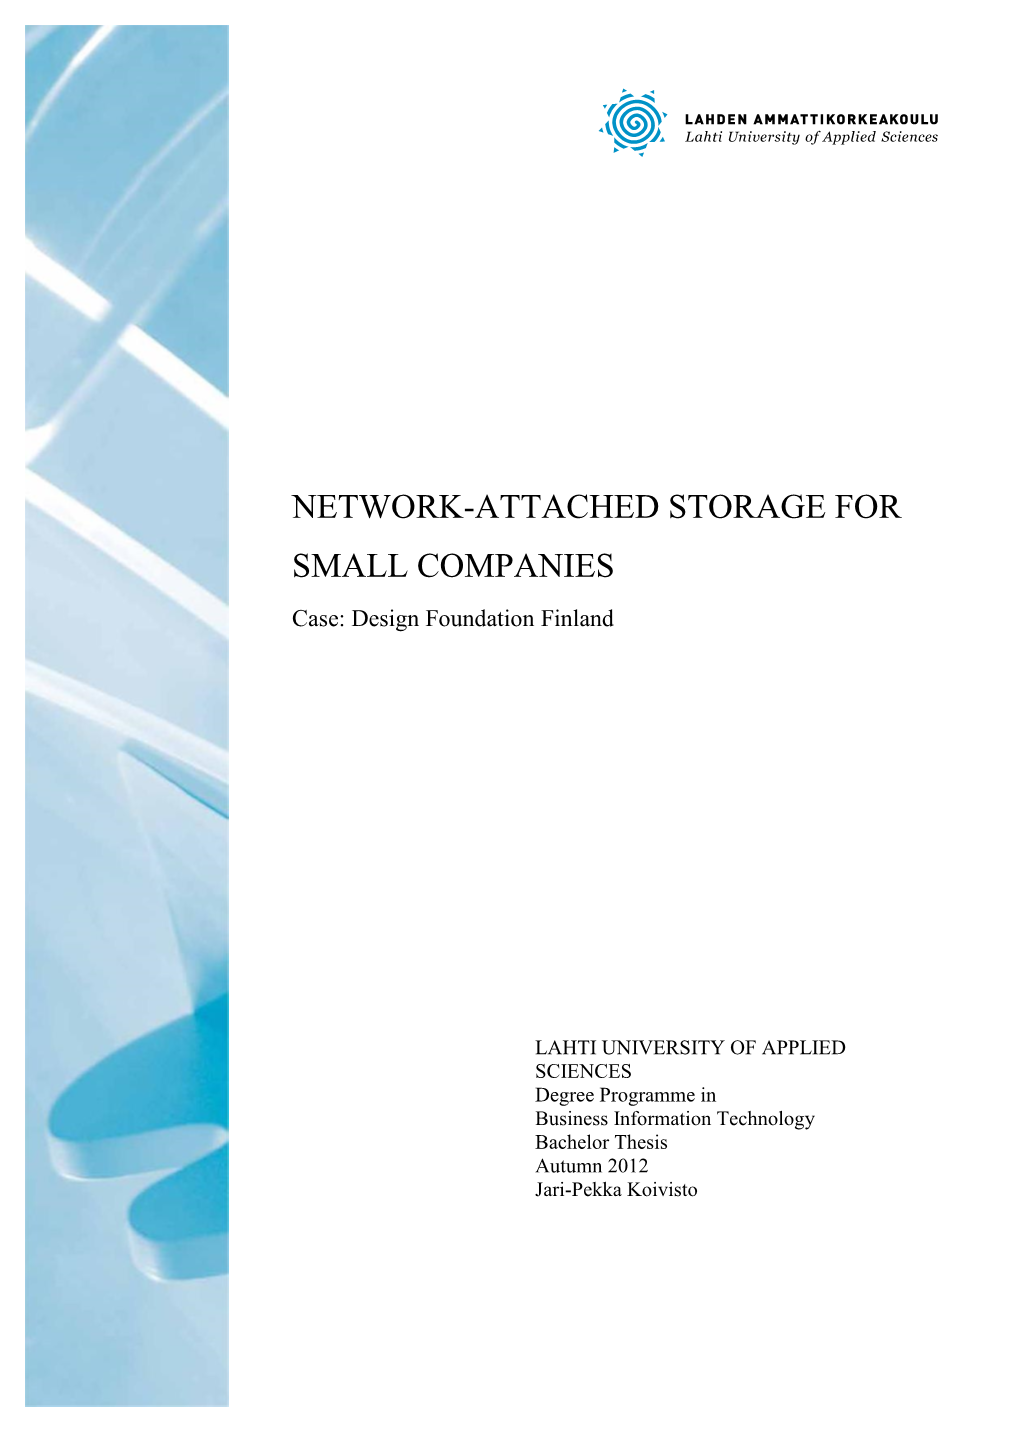 NETWORK-ATTACHED STORAGE for SMALL COMPANIES Case: Design Foundation Finland